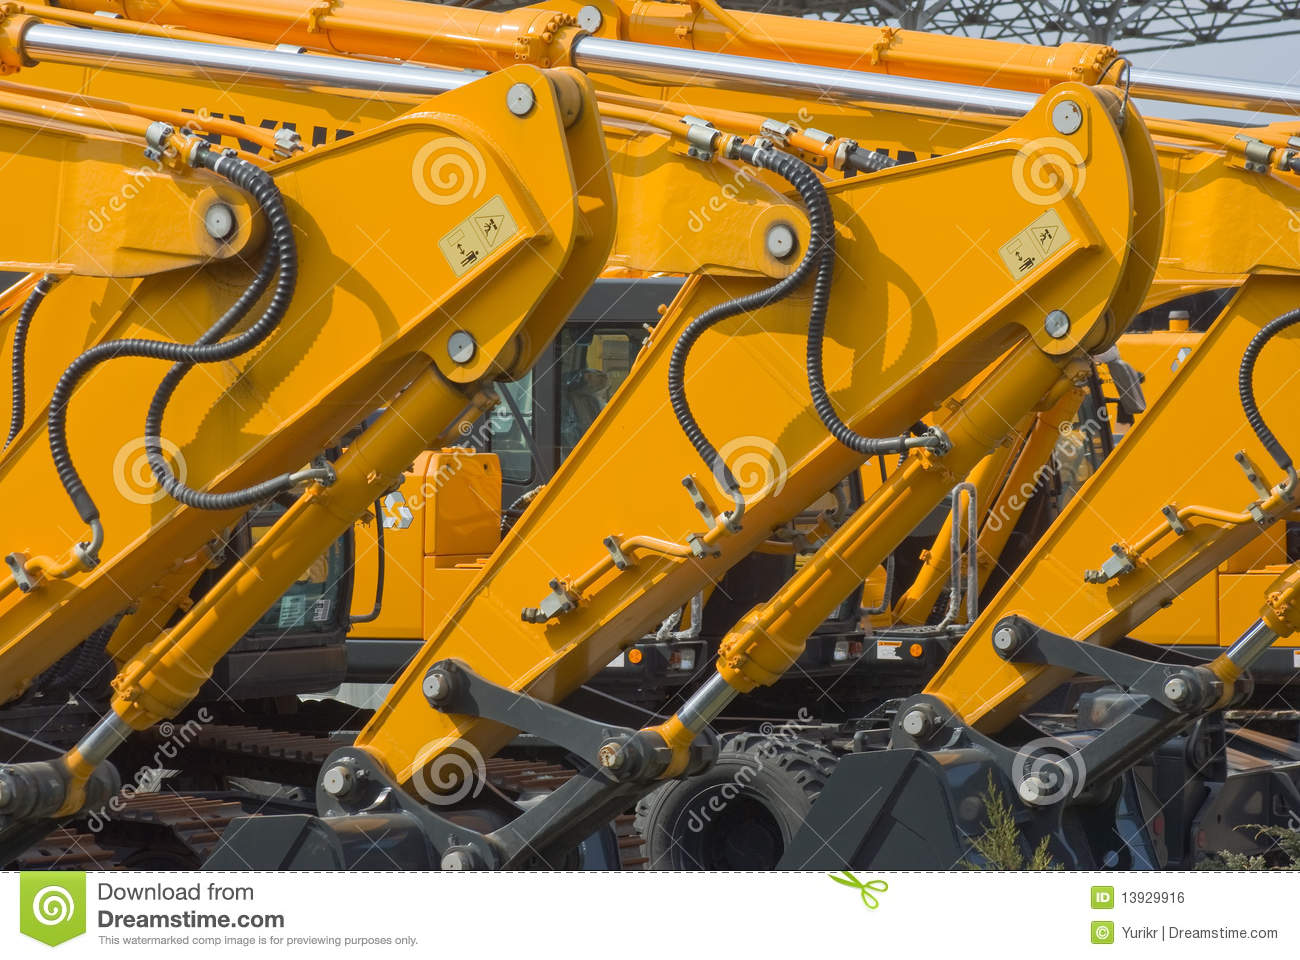 Knuckle Booms Royalty Free Stock Image   Image  13929916